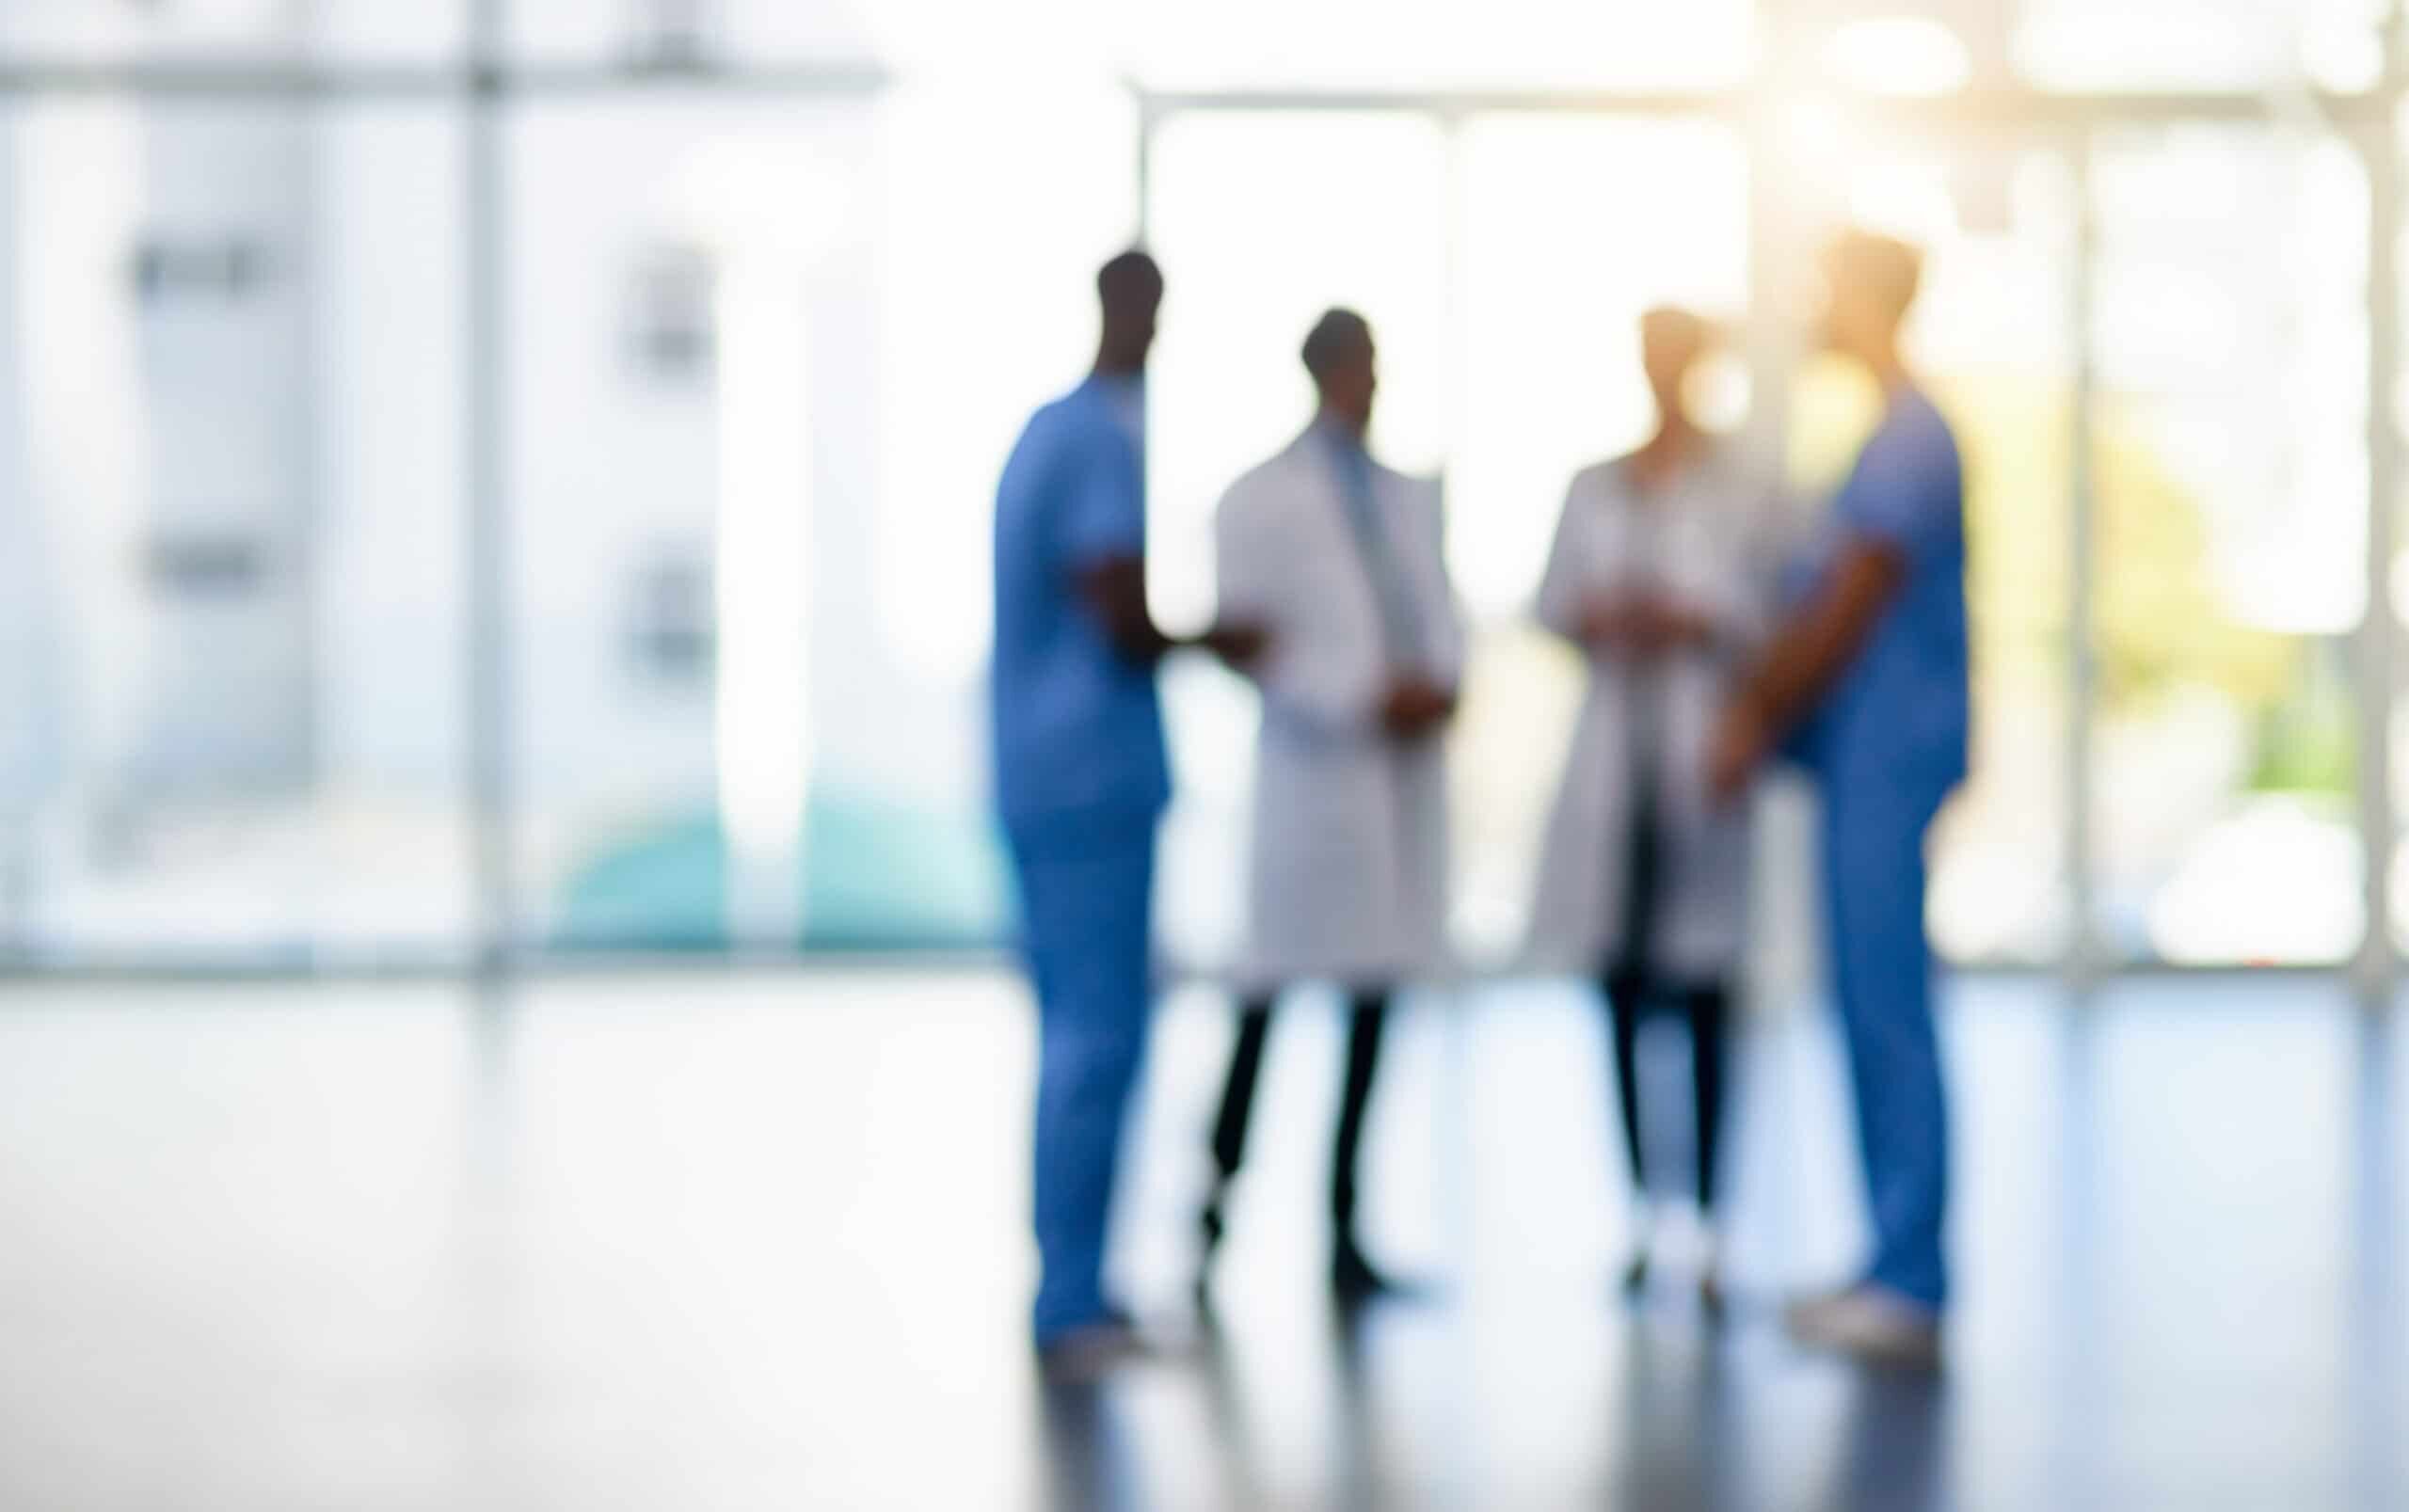 Blurred shot of a team of doctors standing together in a hospital